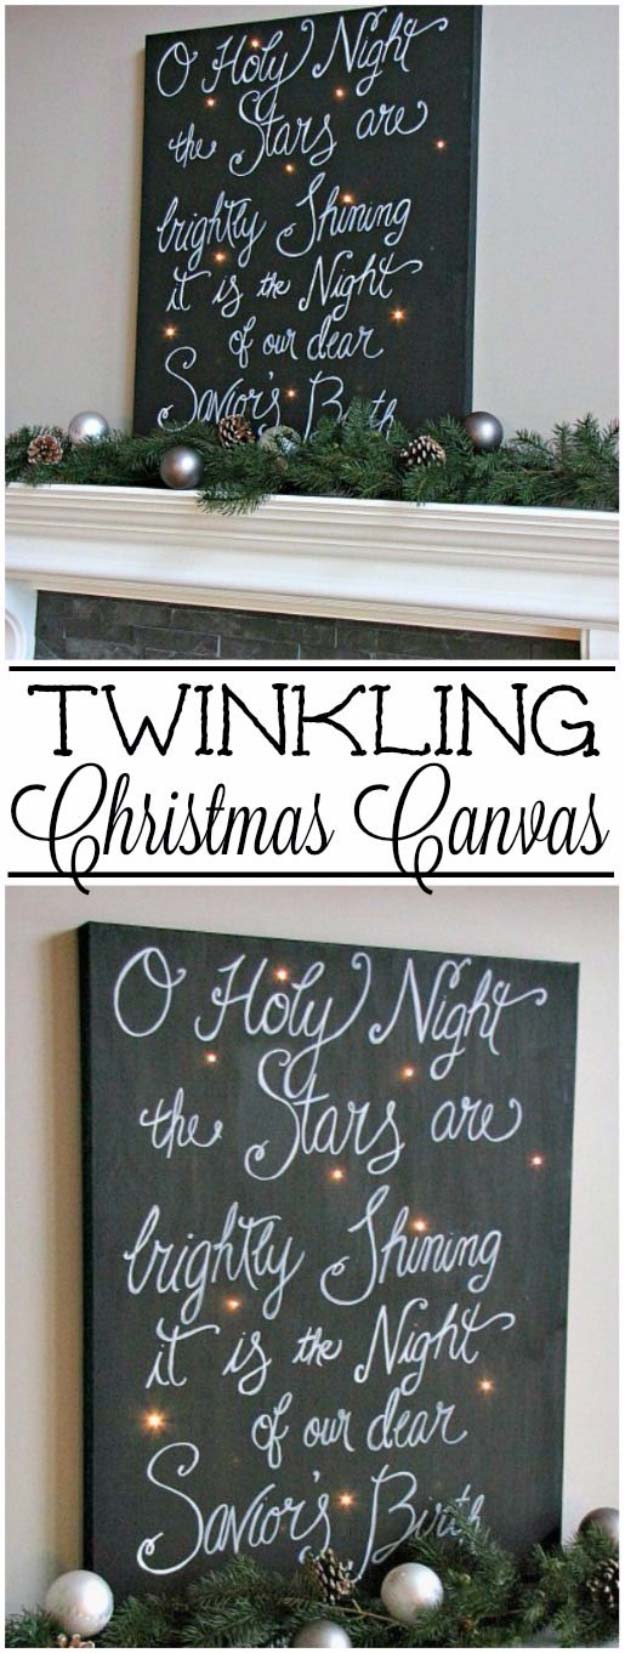 Cool Ways To Use Christmas Lights - Twinkling Christmas Canvas Art - Best Easy DIY Ideas for String Lights for Room Decoration, Home Decor and Creative DIY Bedroom Lighting - Creative Christmas Light Tutorials with Step by Step Instructions - Creative Crafts and DIY Projects for Teens, Teenagers and Adults #diyideas #stringlights #diydecor #teencrafts